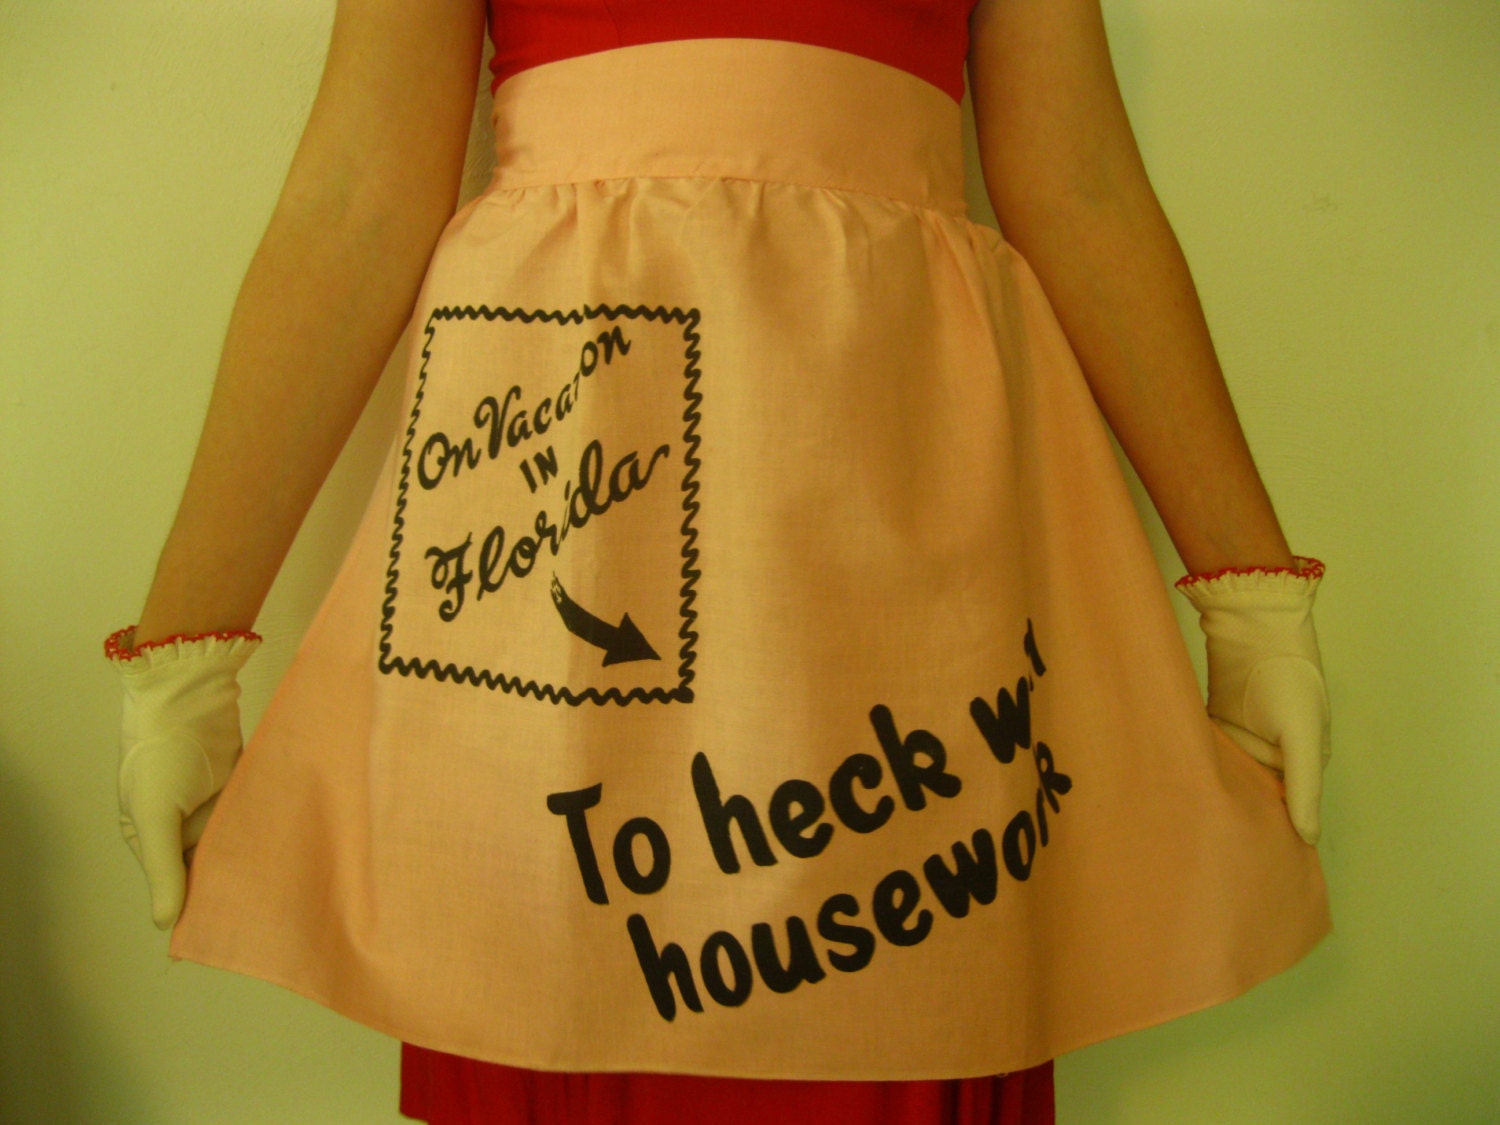 Vintage Florida souvenir apron "On Vacation in Florida - To Heck with Housework" - 1950s pink